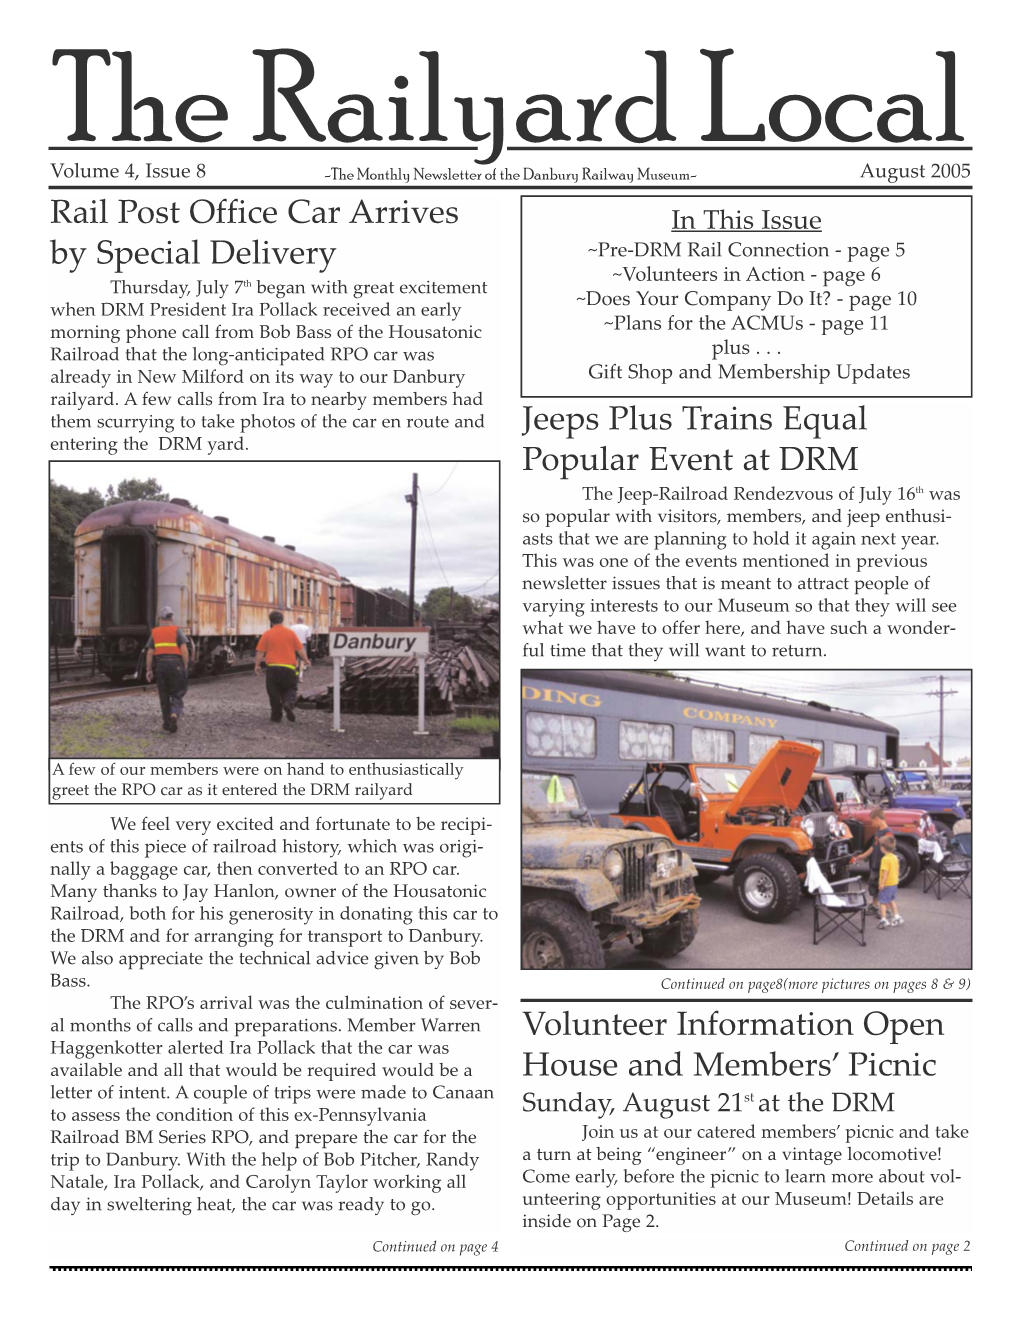 Volunteer Information Open House and Members' Picnic Rail Post Office Car Arrives by Special Delivery Jeeps Plus Trains Equal